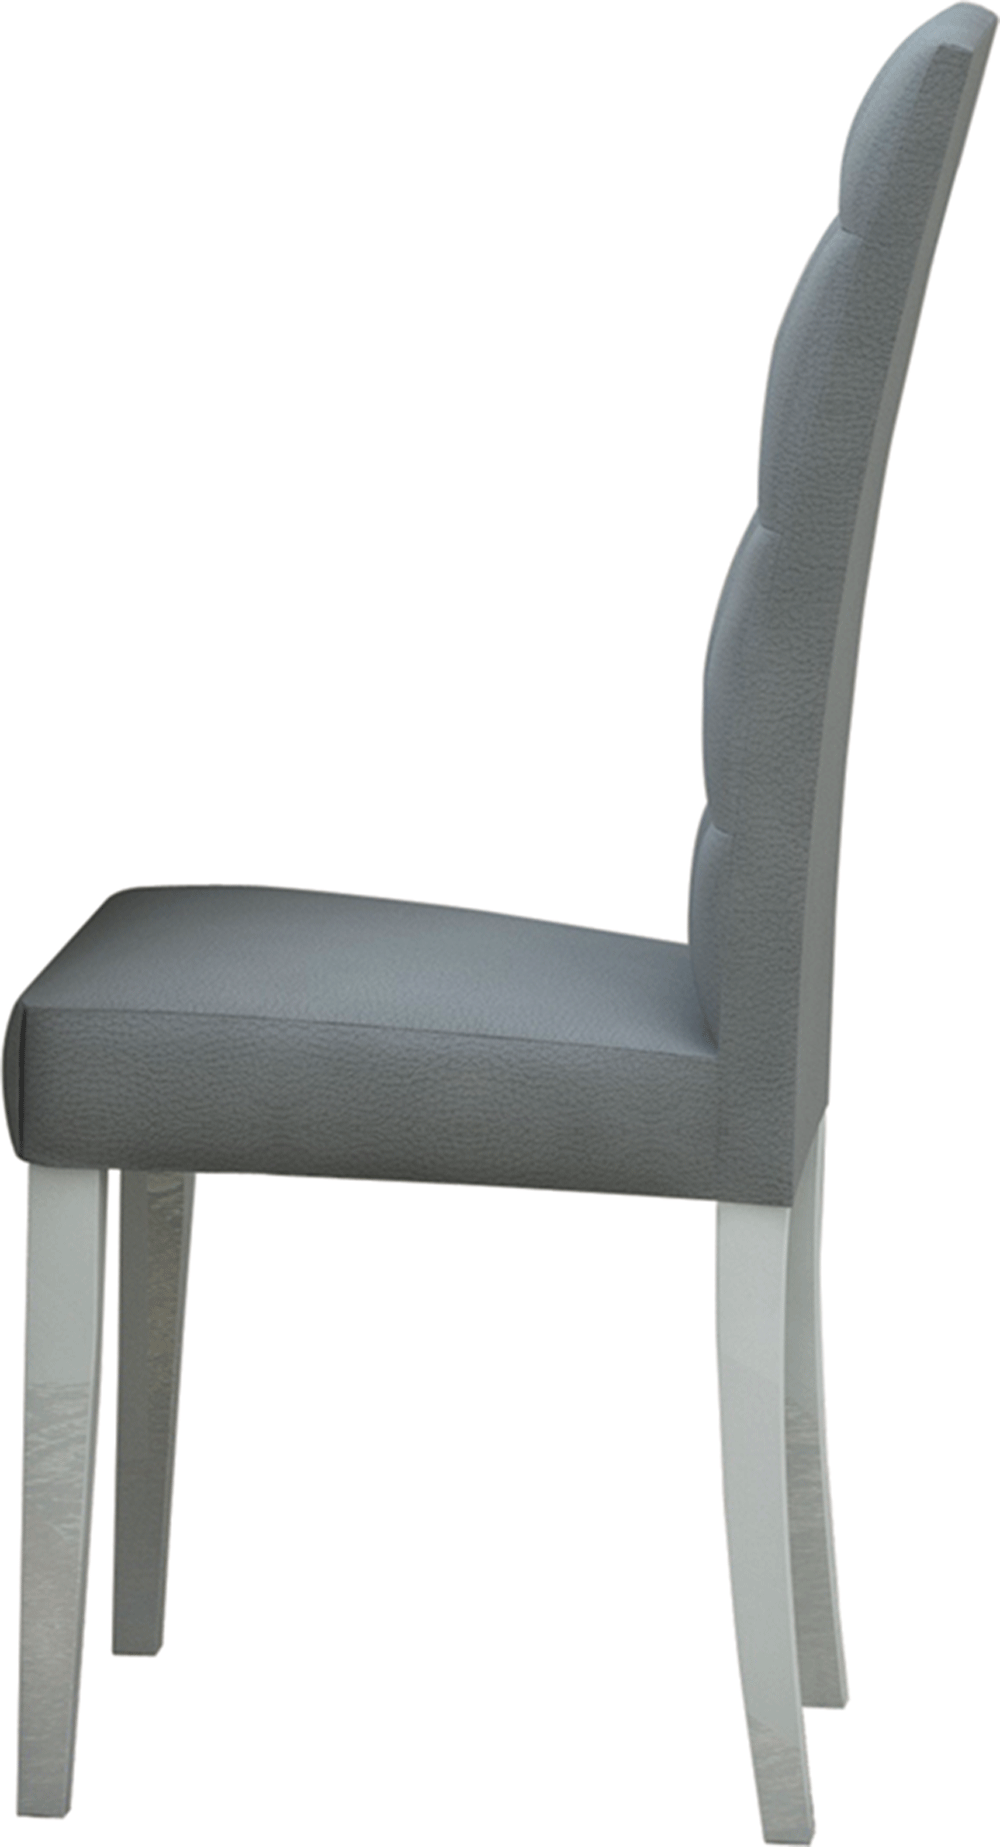 Brands Status Modern Collections, Italy Elegance Chair